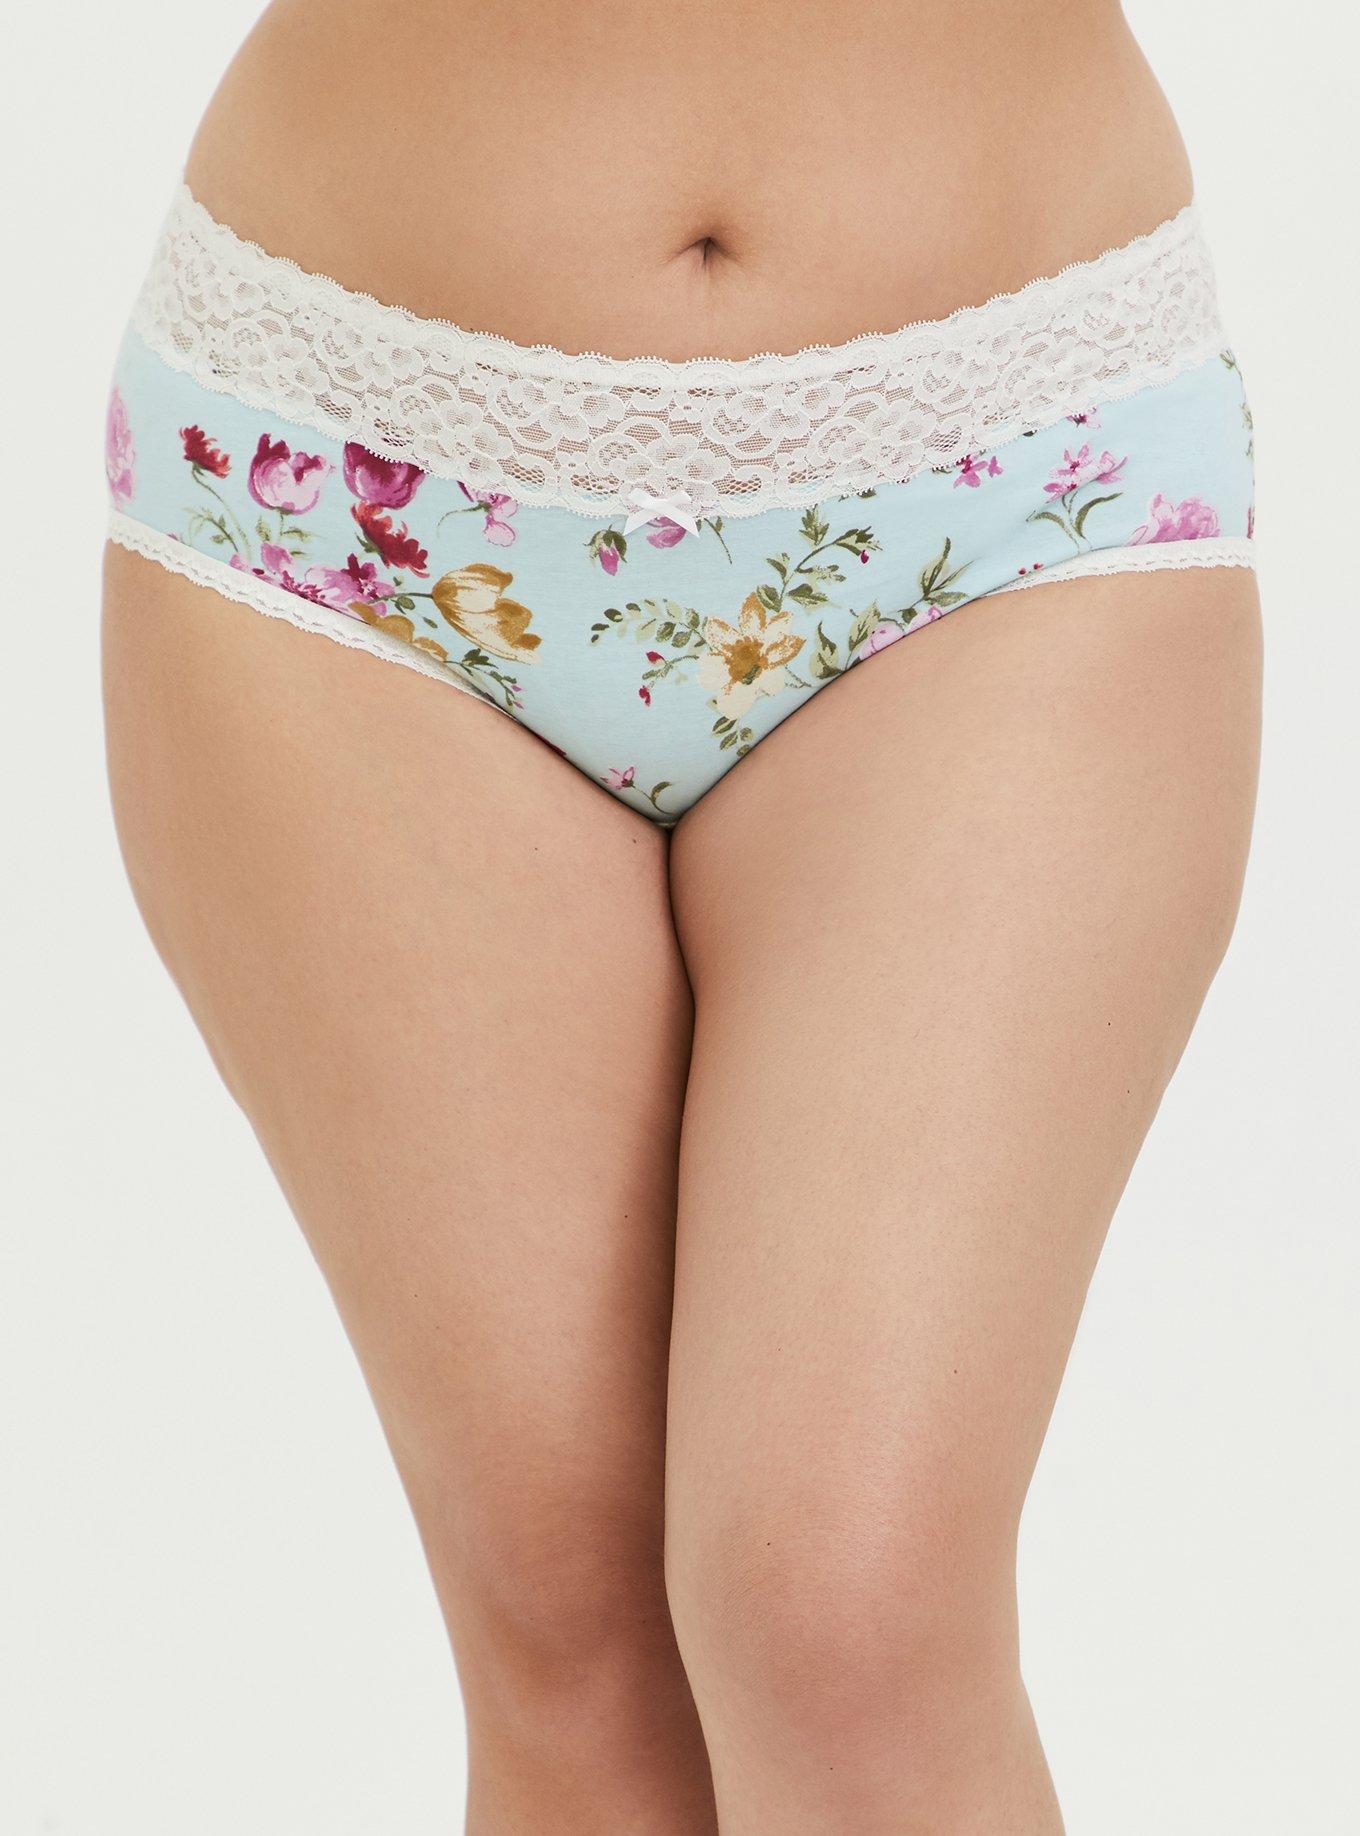 Women's Floral Print Cotton Cheeky Underwear with Lace Waistband